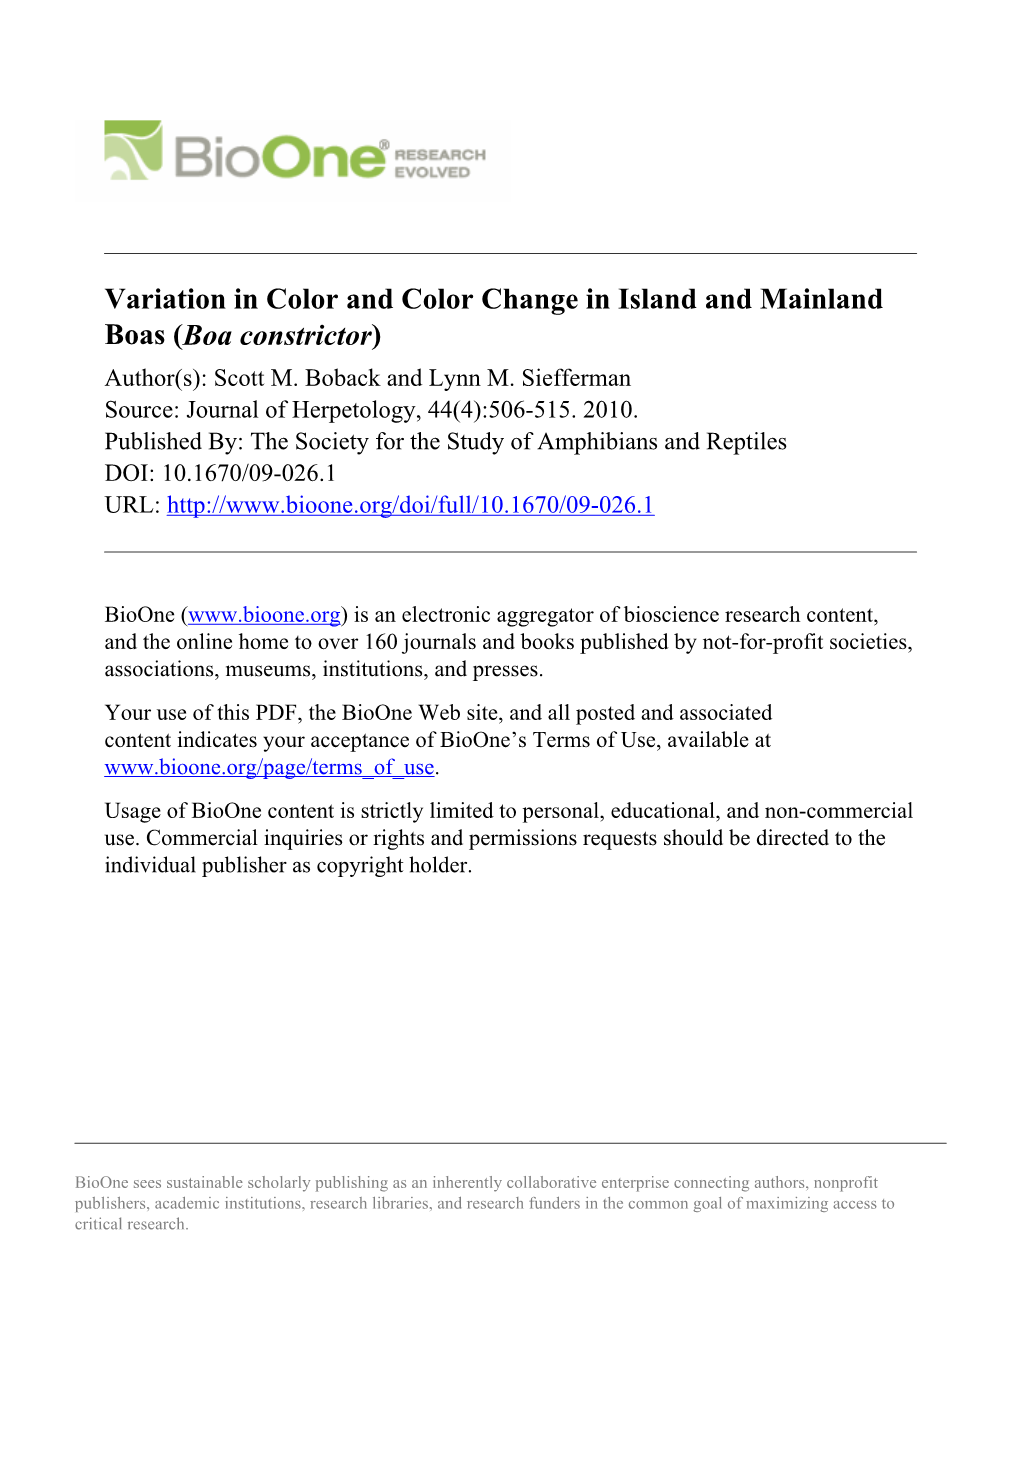 Variation in Color and Color Change in Island and Mainland Boas (Boa Constrictor) Author(S): Scott M